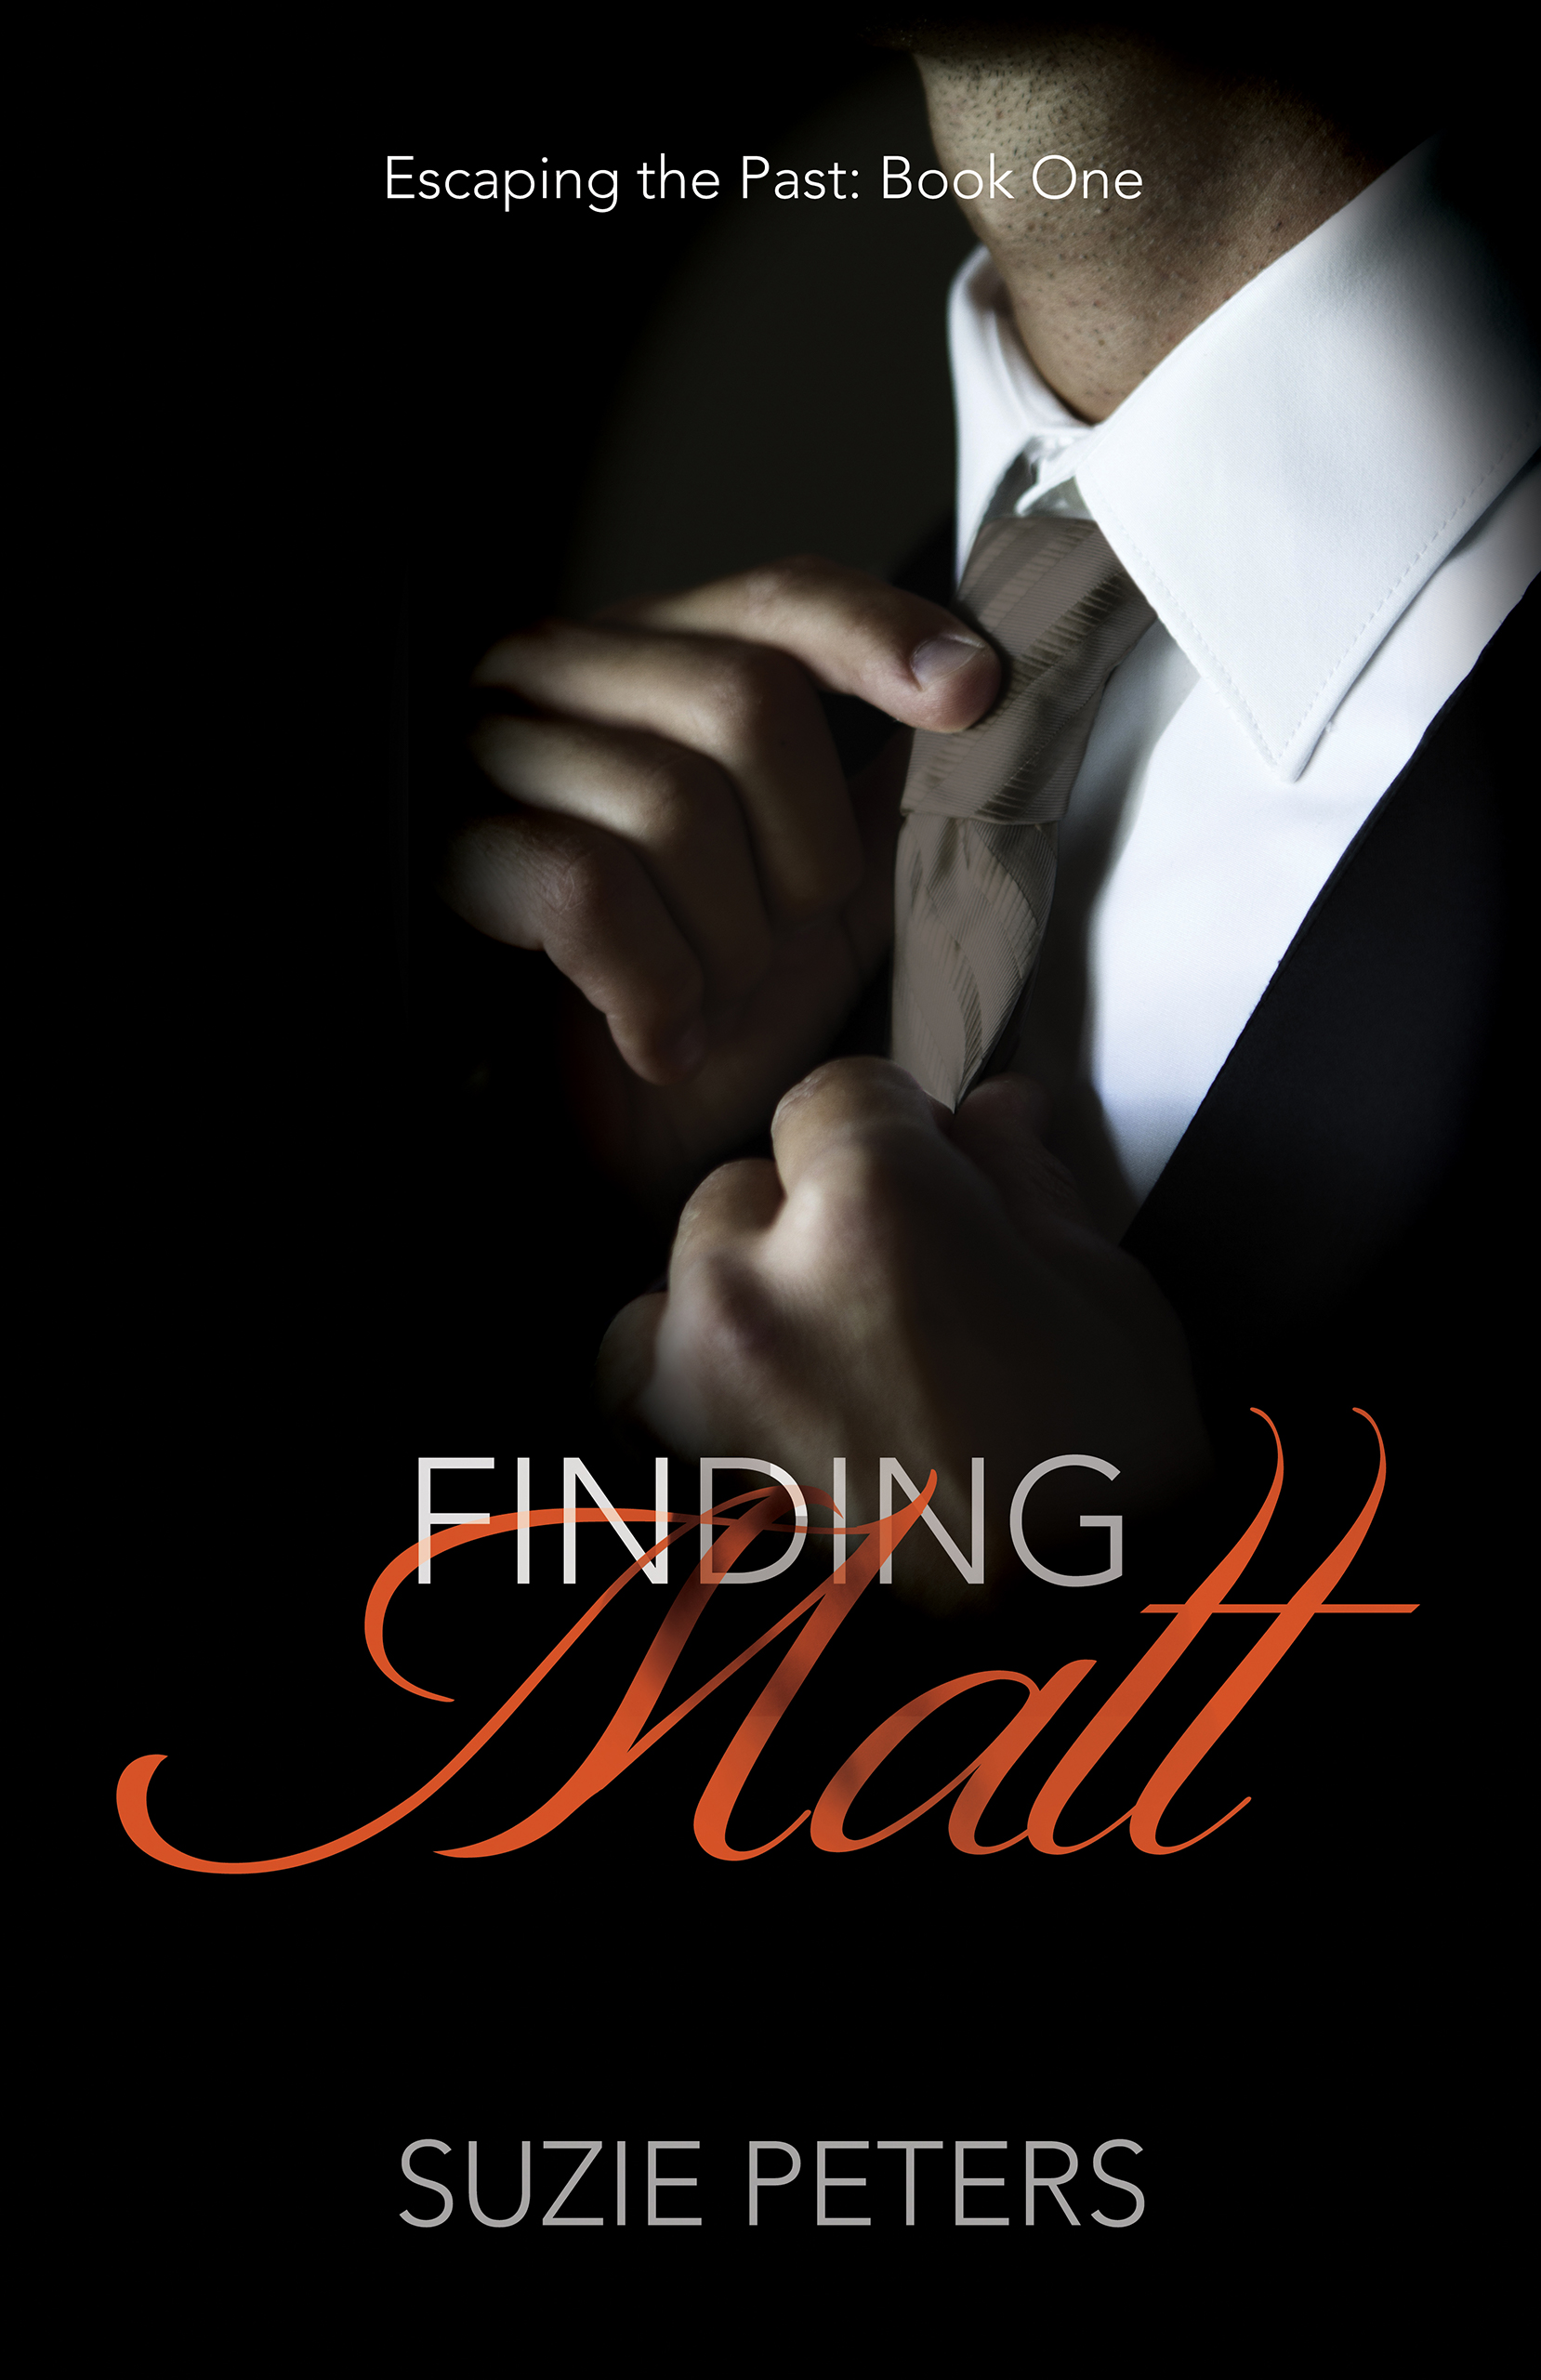 Finding Matt by Suzie Peters front cover image.